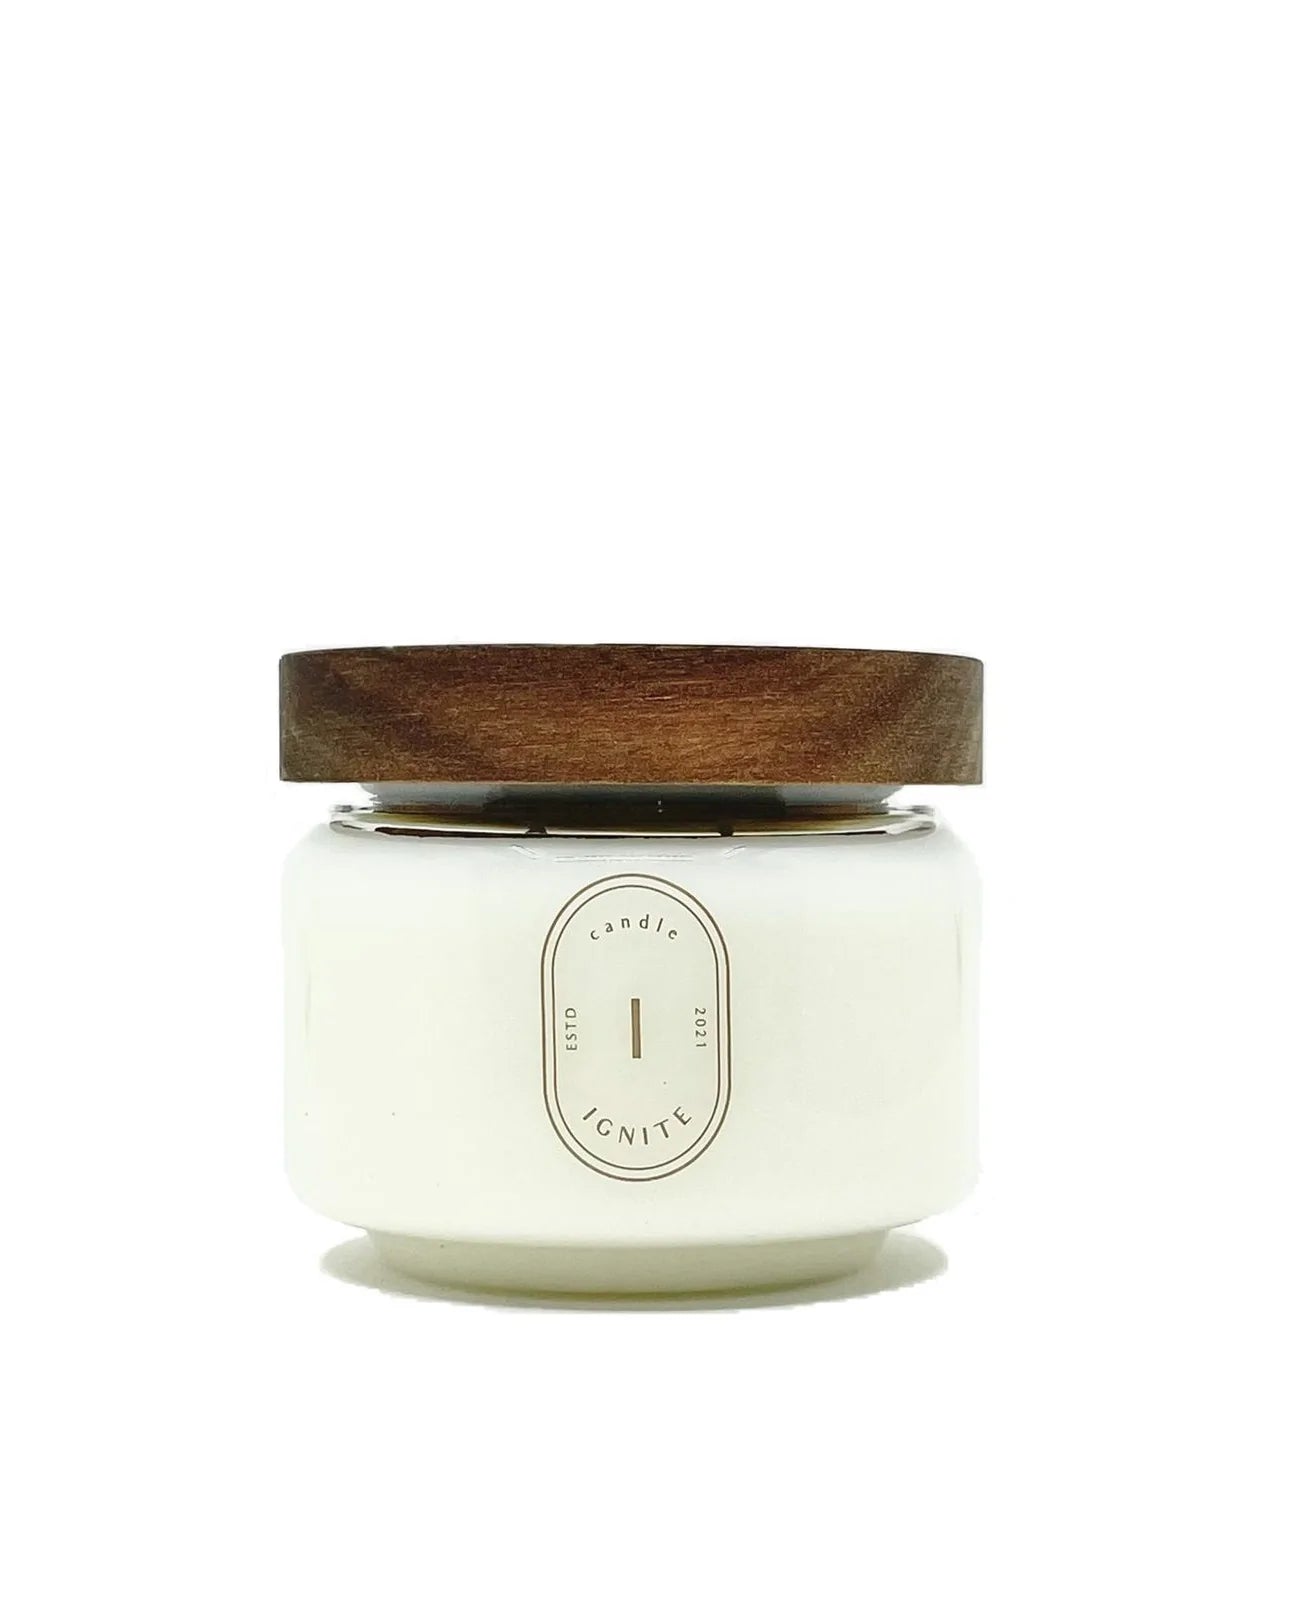 Sleep aromatherapy scented candle